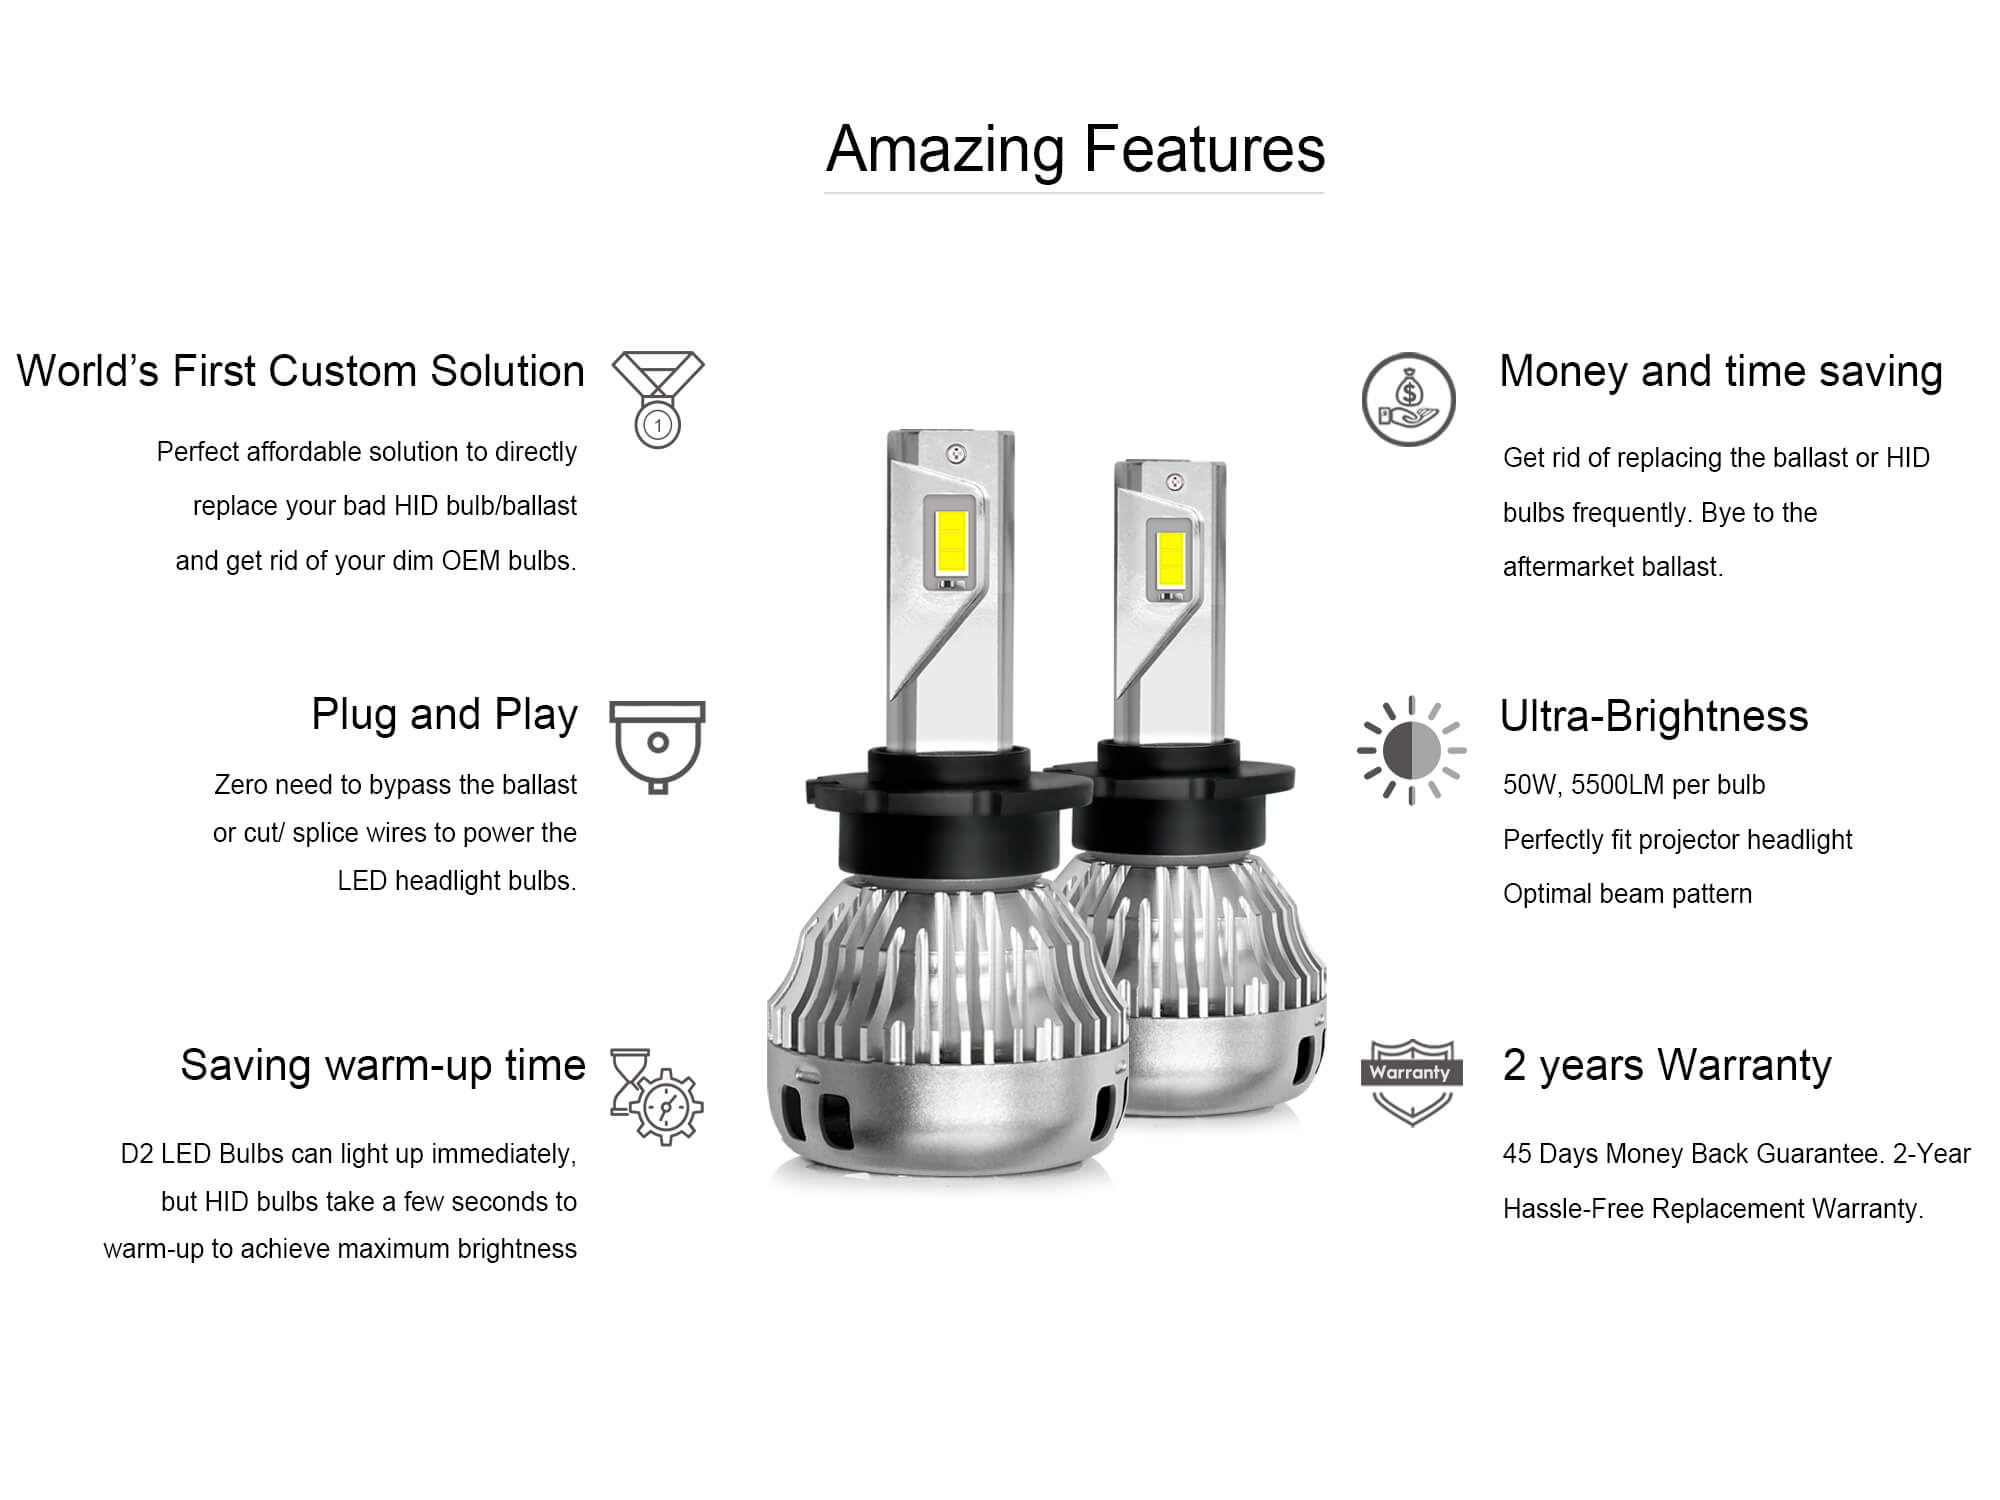 Alla Lighting CANBus D2R D2S LED Headlights Bulbs, Newest 90W 1:1  Plug-n-Play Easy Installation Change HID Conversion Kits Headlamps, 12000  Lumens